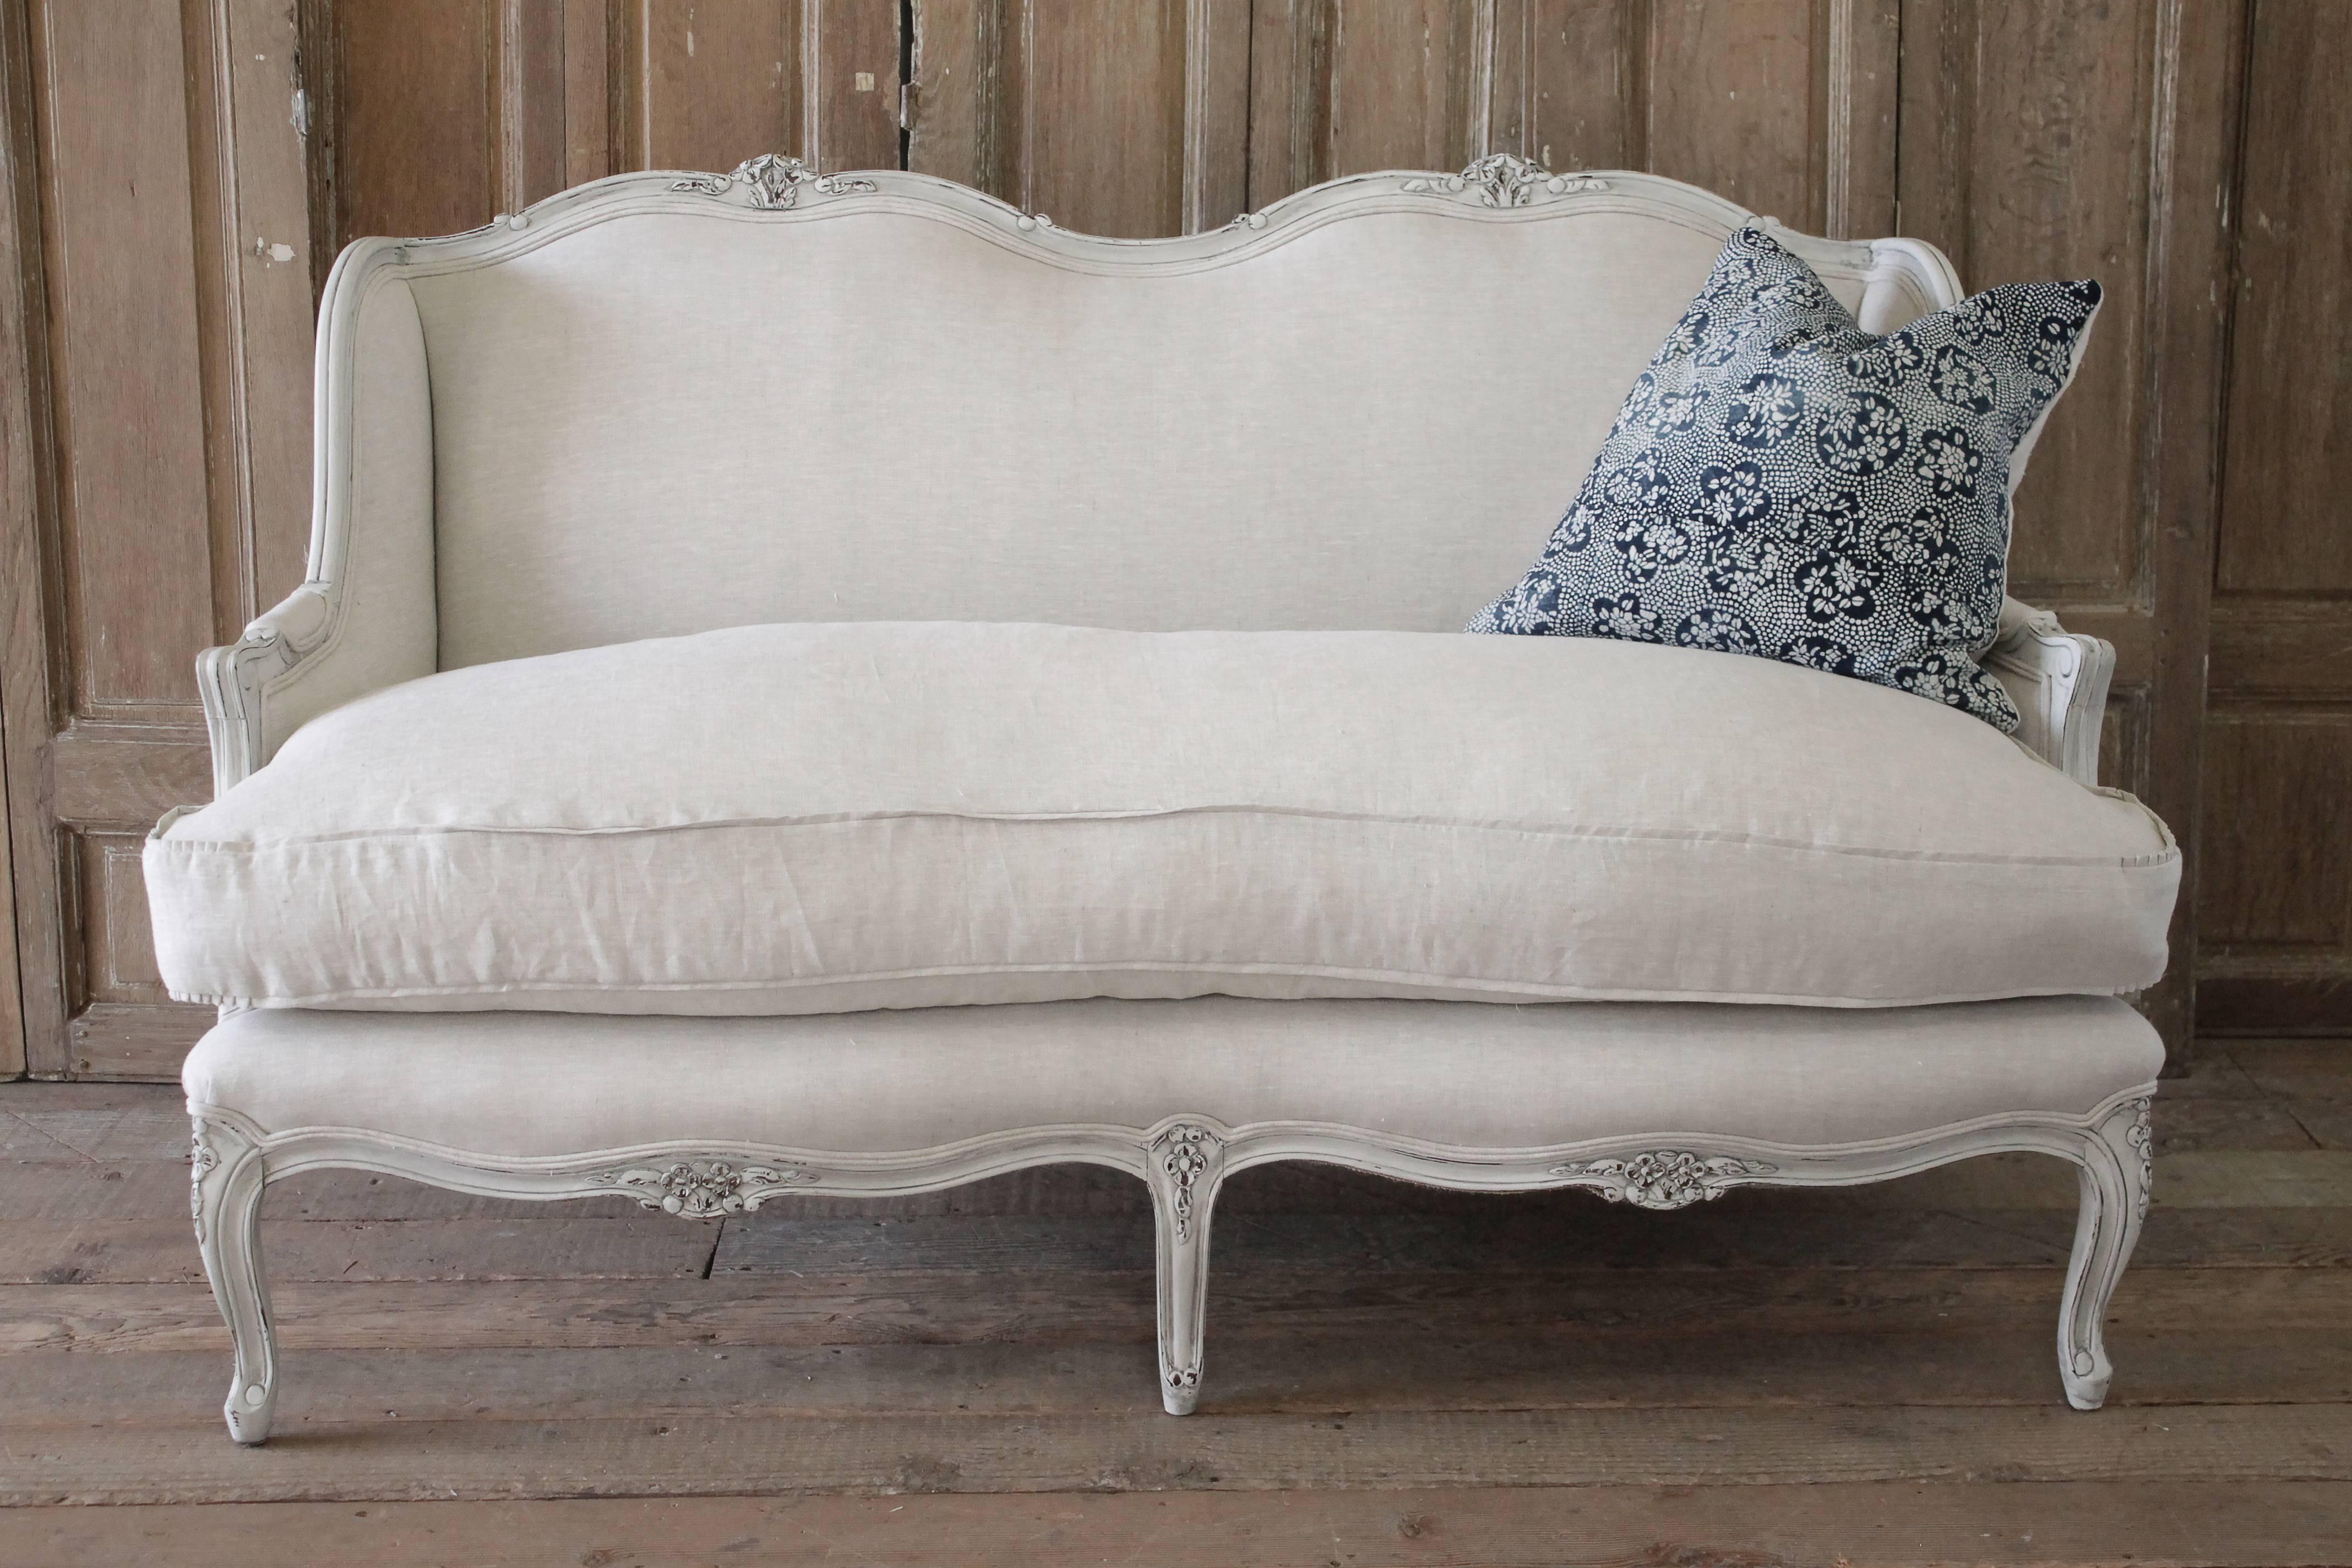 Lovely French Country loveseat painted in oyster white with subtle areas of distressing, and hand applied antique patina. Reupholstered in 100% pure Belgian linen, finished with a double welt edge, and new plump down cushion. Measures: 61